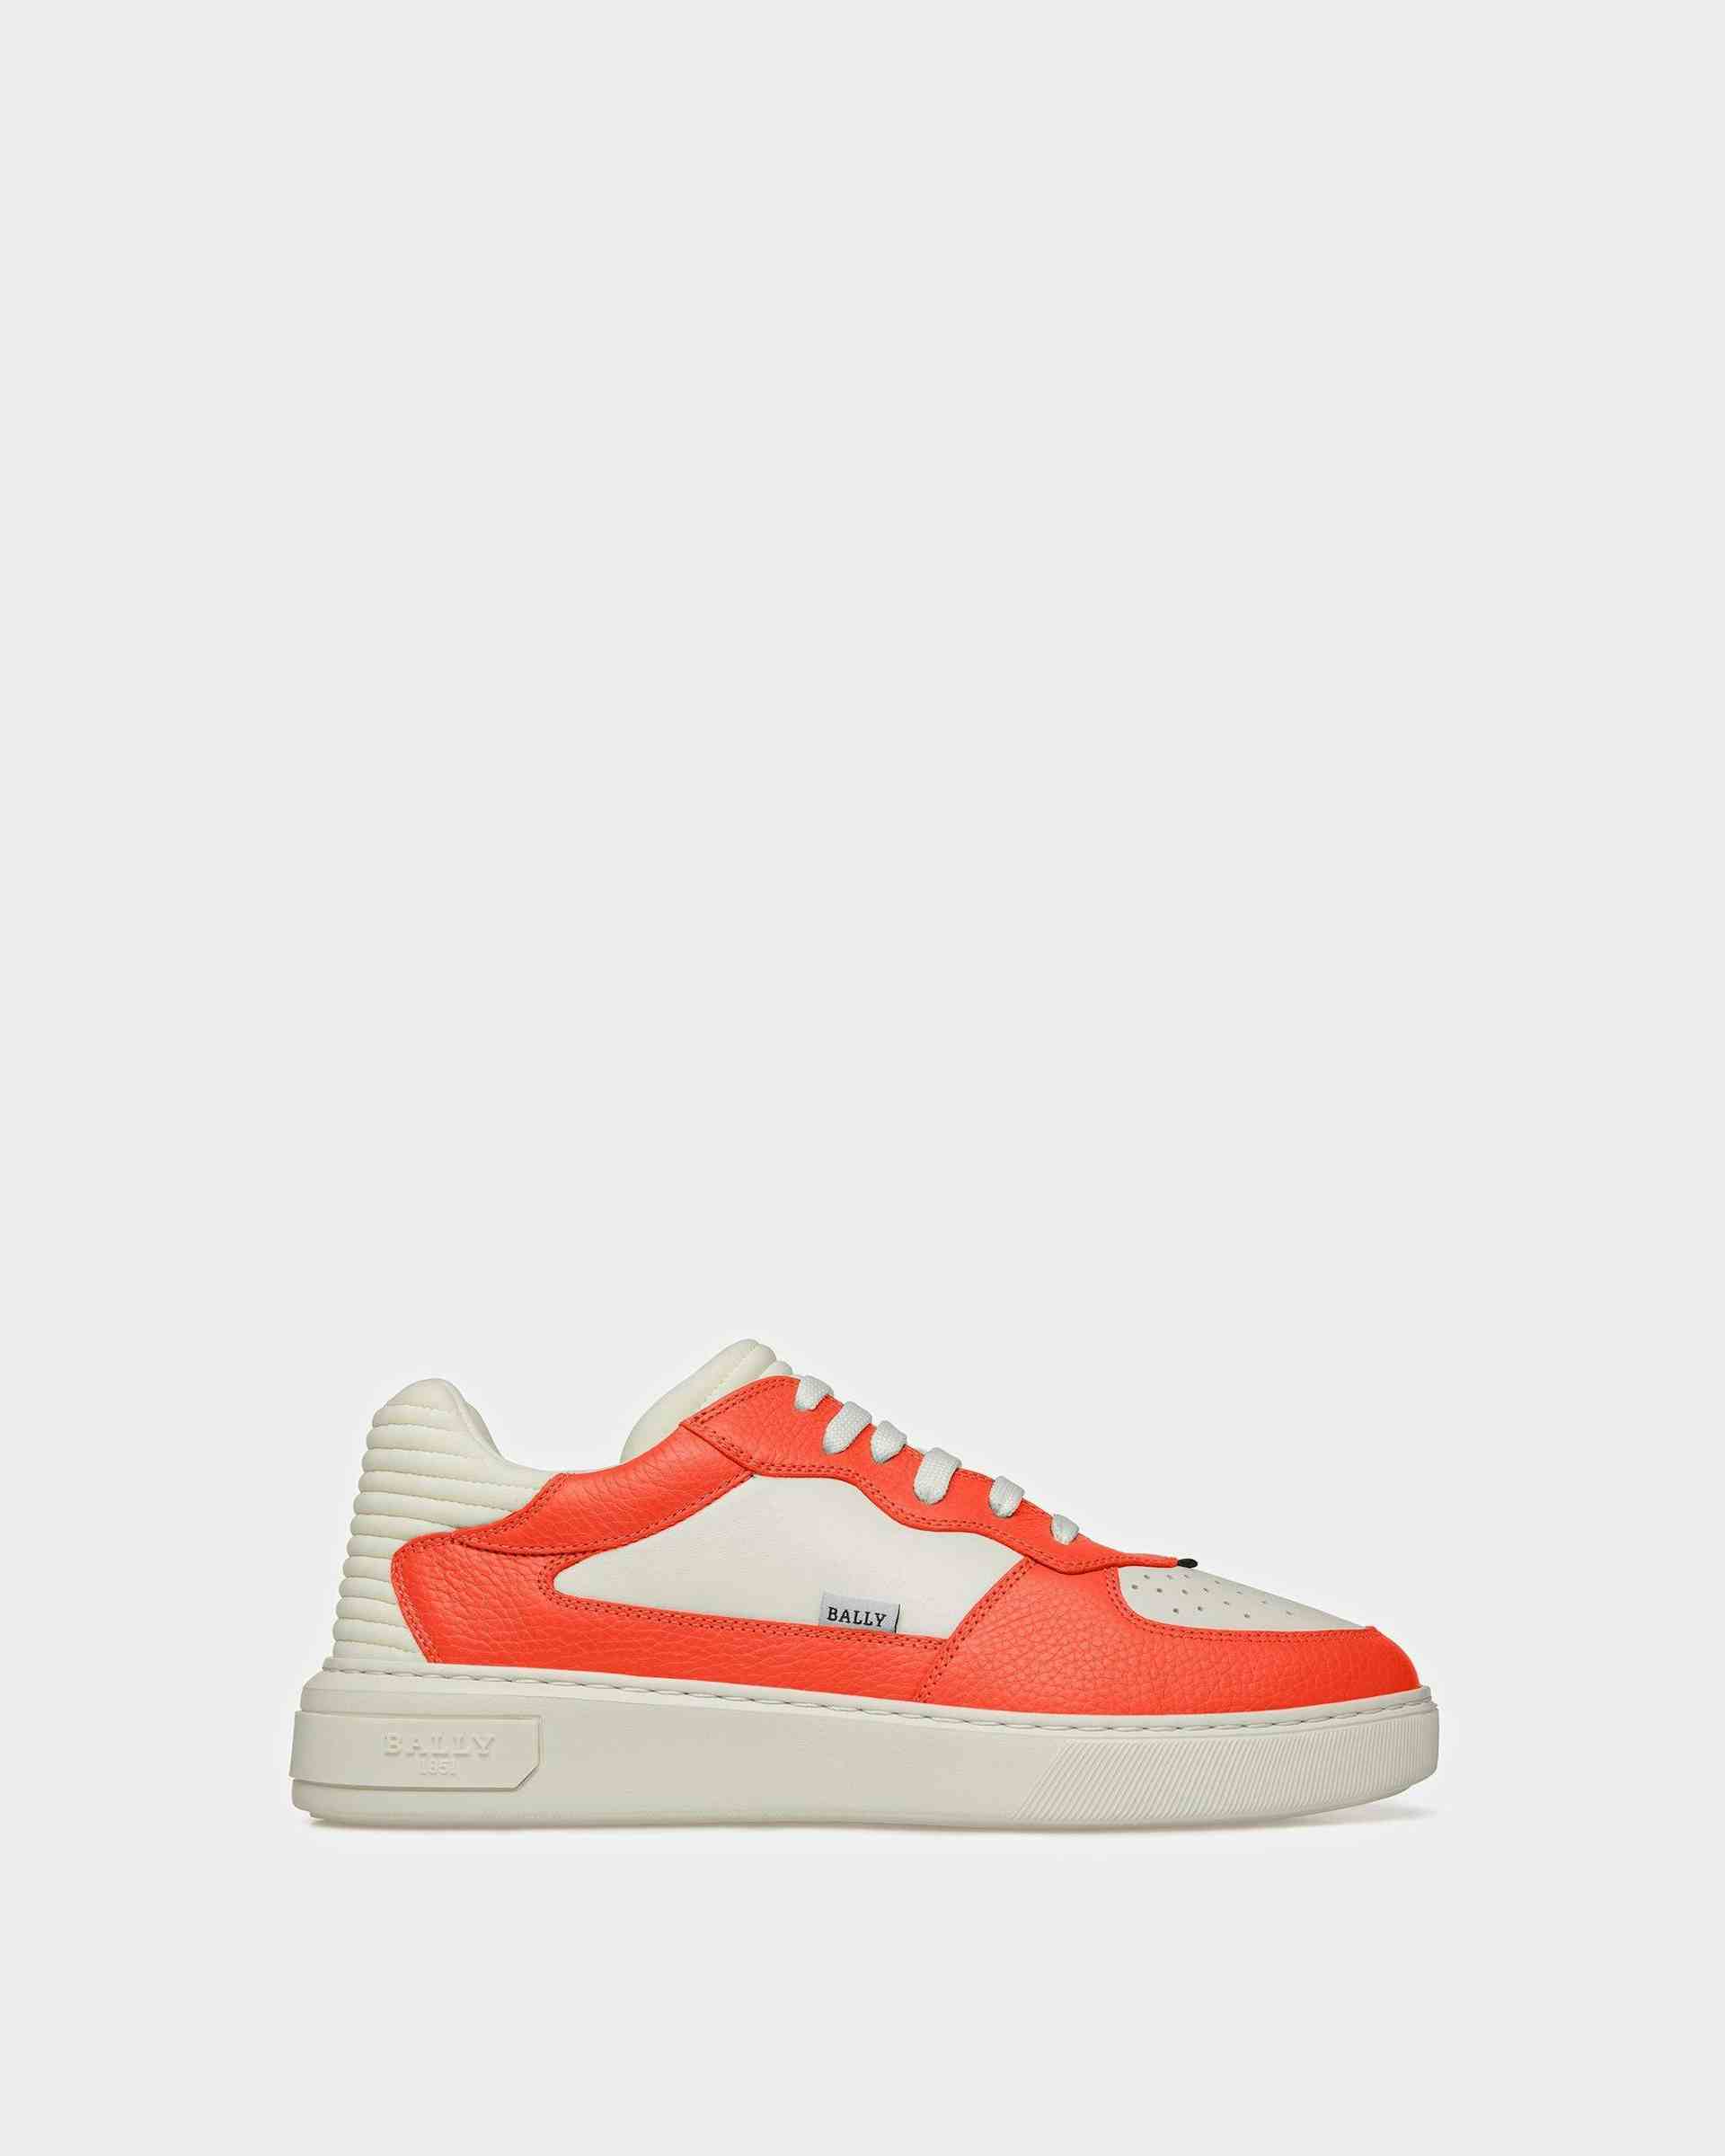 Mark Leather Sneakers In Orange And White - Men's - Bally